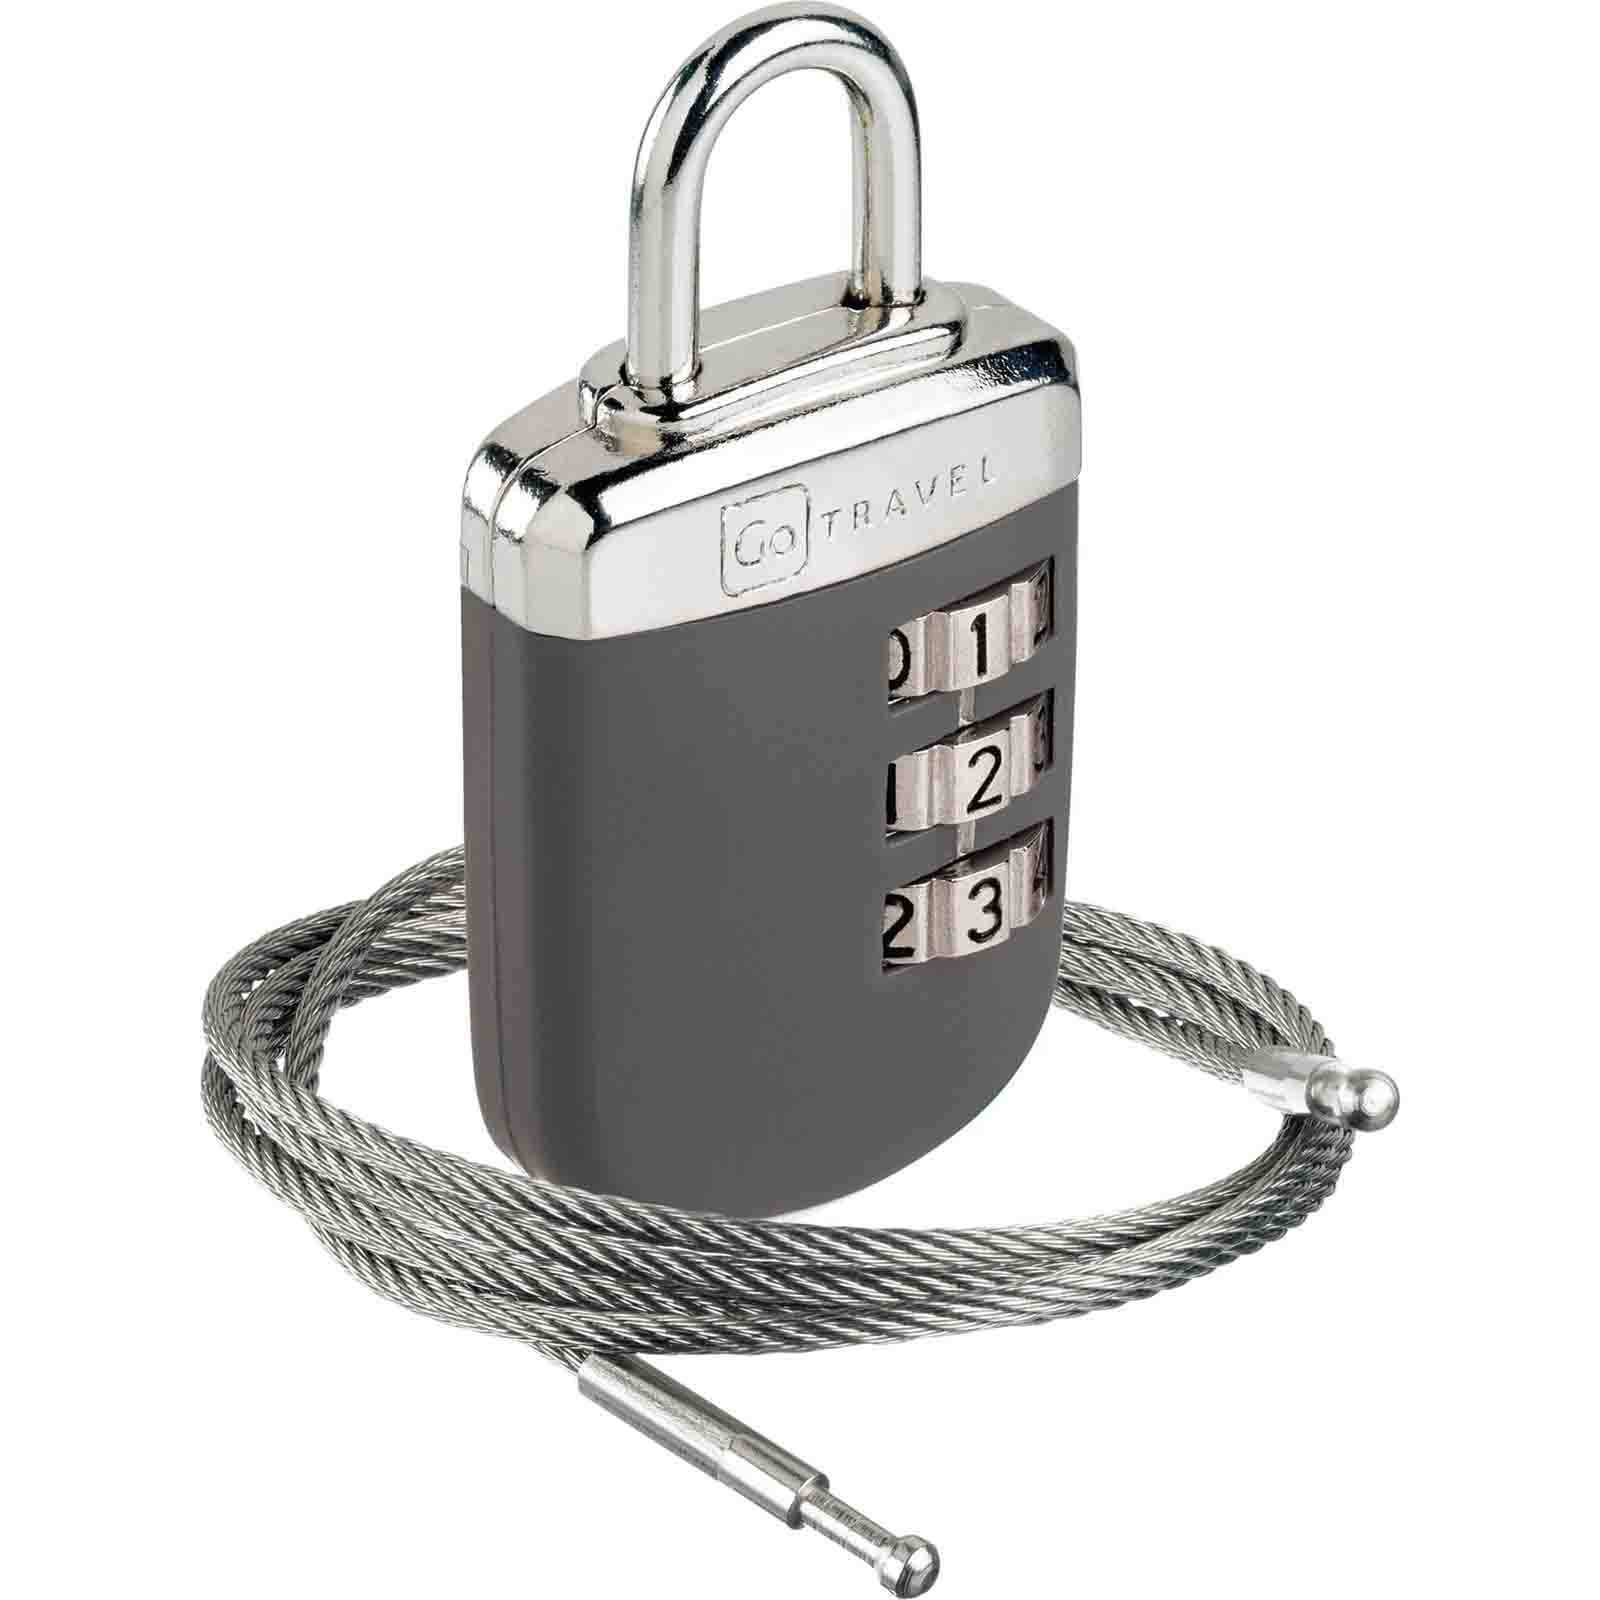 Go-Travel-Link-Cable-Combi-Padlock-Angle